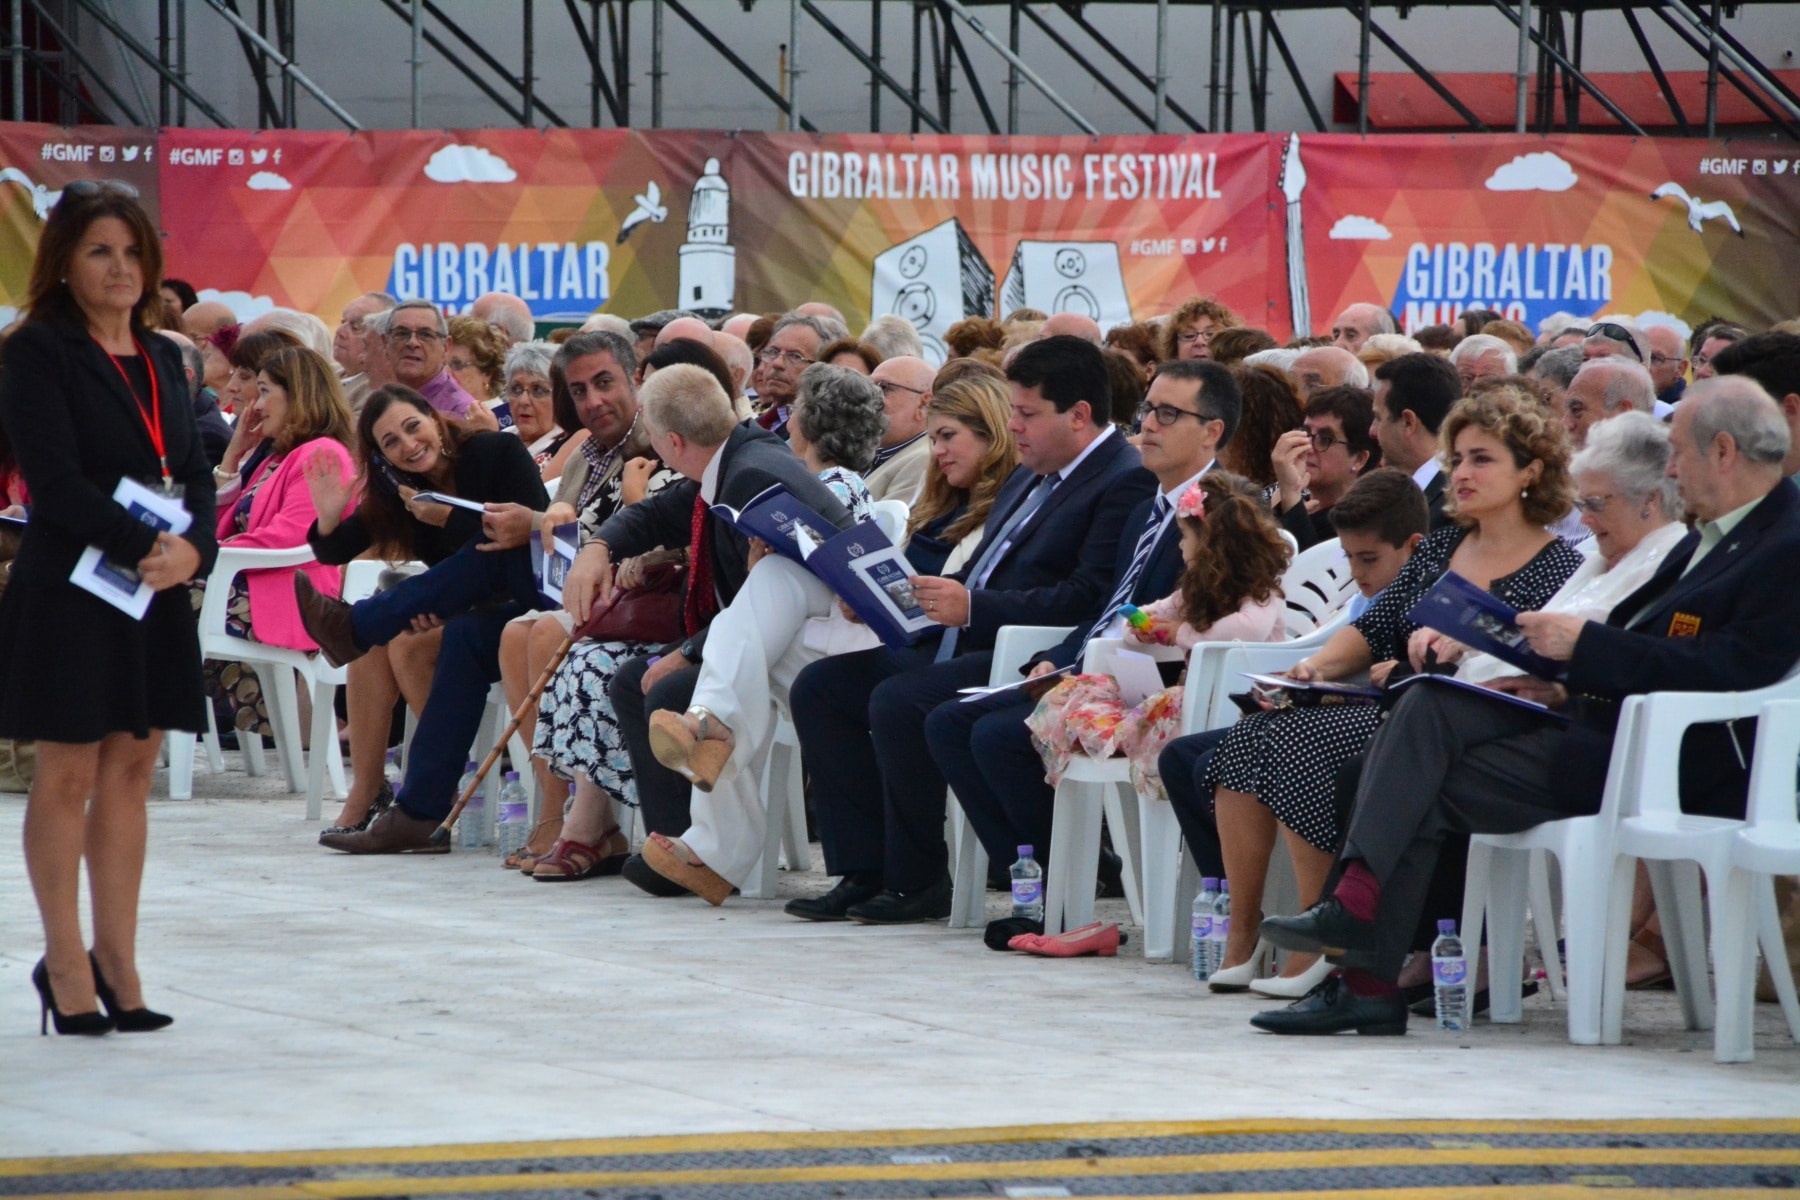 Gibraltar -  7th September 2015 - Gibraltar celebrated its first official Evacuation Commemoration Day with a concert hosted by the government of Gibraltar for some 800 evacuee survivors from the Second World War. The concert was held at the Victoria Stadium using the same stages and facilities used the day earlier by the Gibraltar Music Festival.Evacuation Commemoration Day was officially introduced earlier this year after Gibraltar celebrated 75 years since the whole of the Gibraltar population was evacuated during the second World War. Many of the Gibraltarians were taken to London where some died during the London blitz. Whilst most stayed in London, others were taken to Northern Ireland, Madiera and Jamacia. It was only a confrontation between population leaders that Gibraltarians were allowed back on the Rock after British officials had initially refused to return the population back to its rightful home.